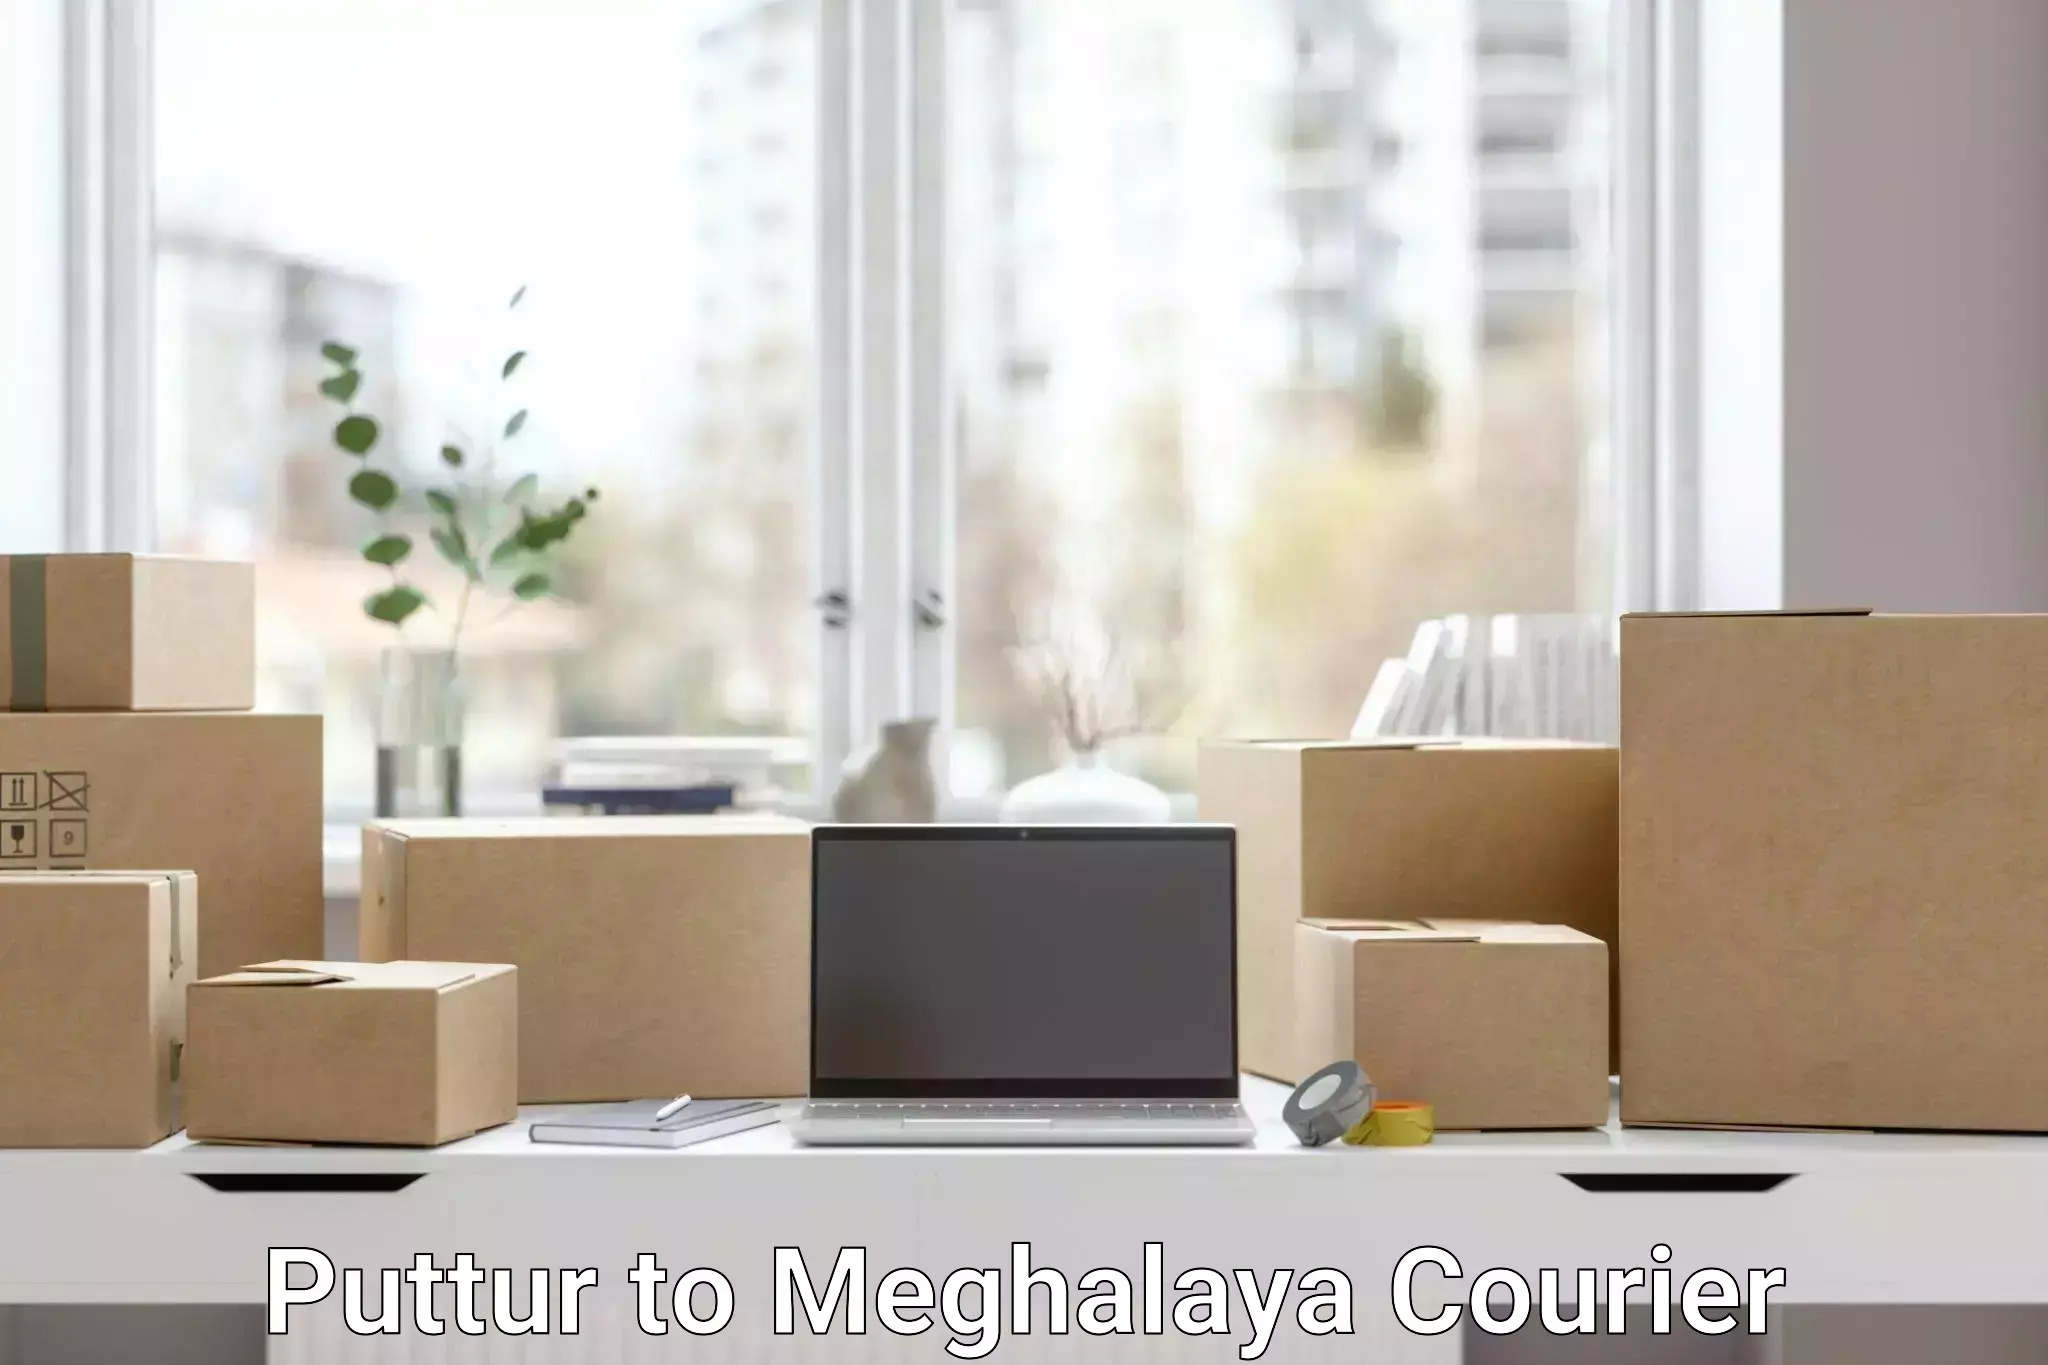 Customer-focused courier in Puttur to Shillong